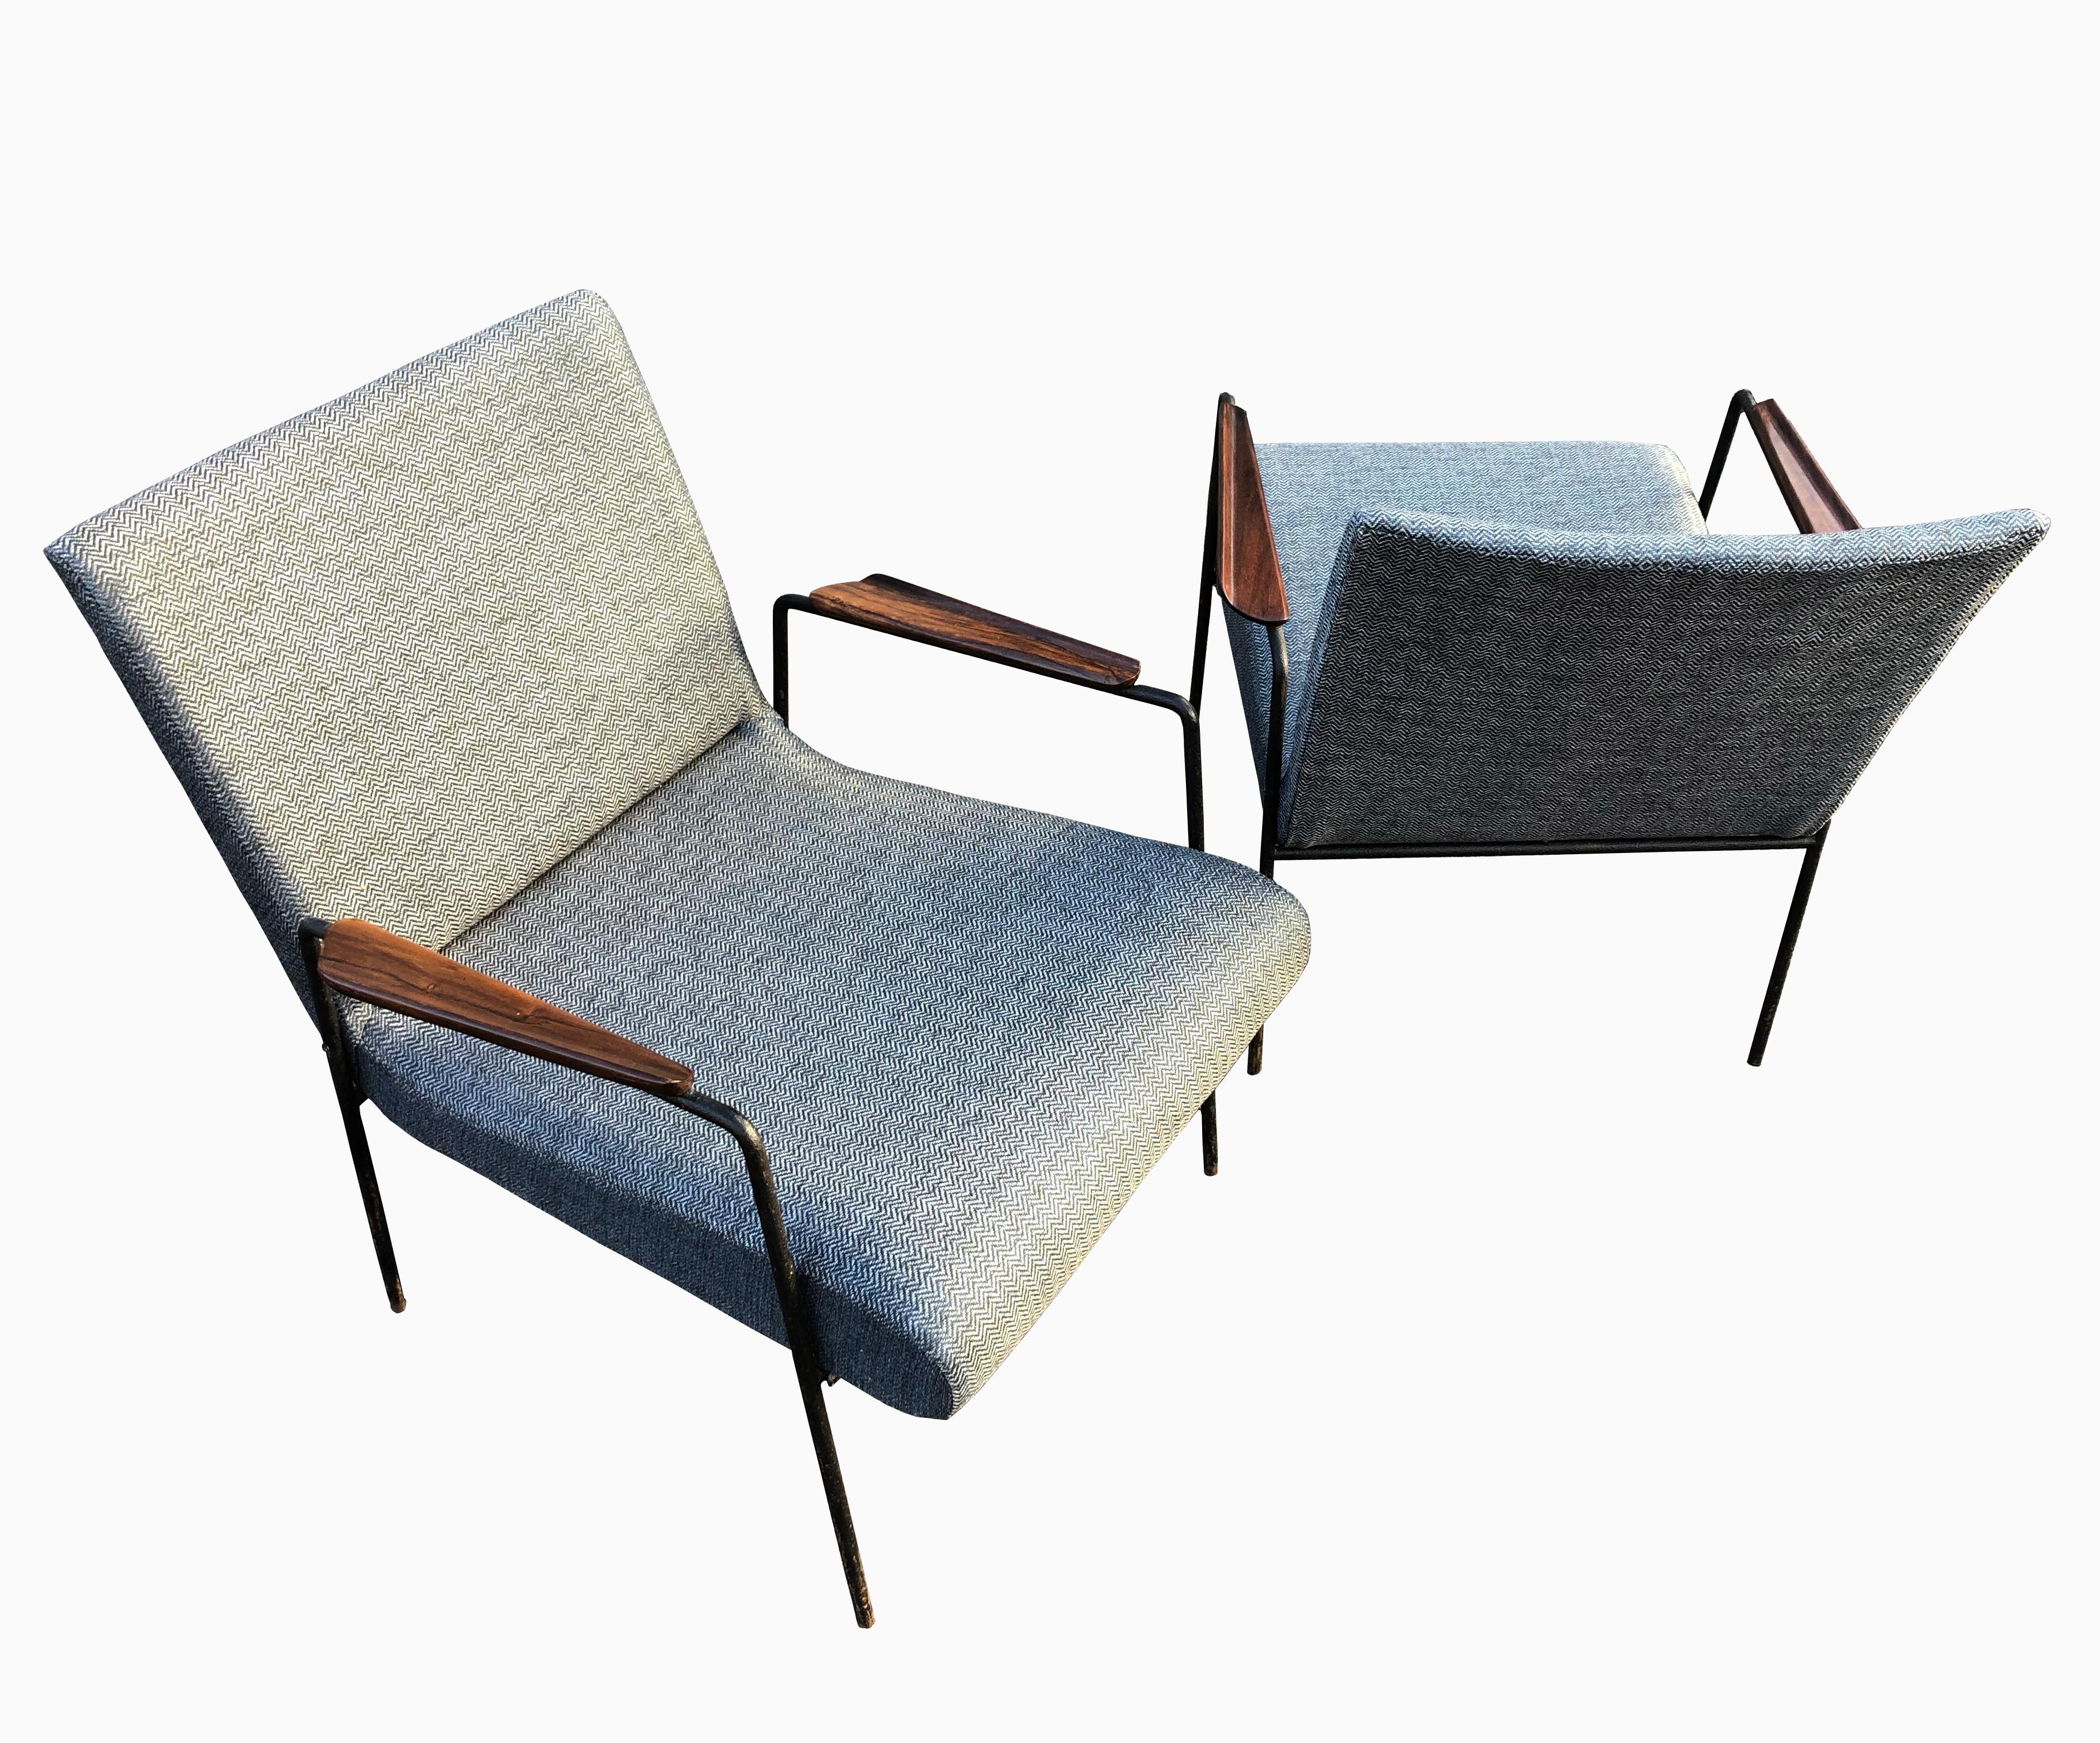 Joaquim Tenreiro, Leve armchairs (light) - 1960s. Manufactured by Tenreiro Móveis e Decorações. Metal frame, armrests in Jacaradá. Metal shows signs of age but otherwise is in great condition. 
New upholstery.

The wood version of the Leve chair,